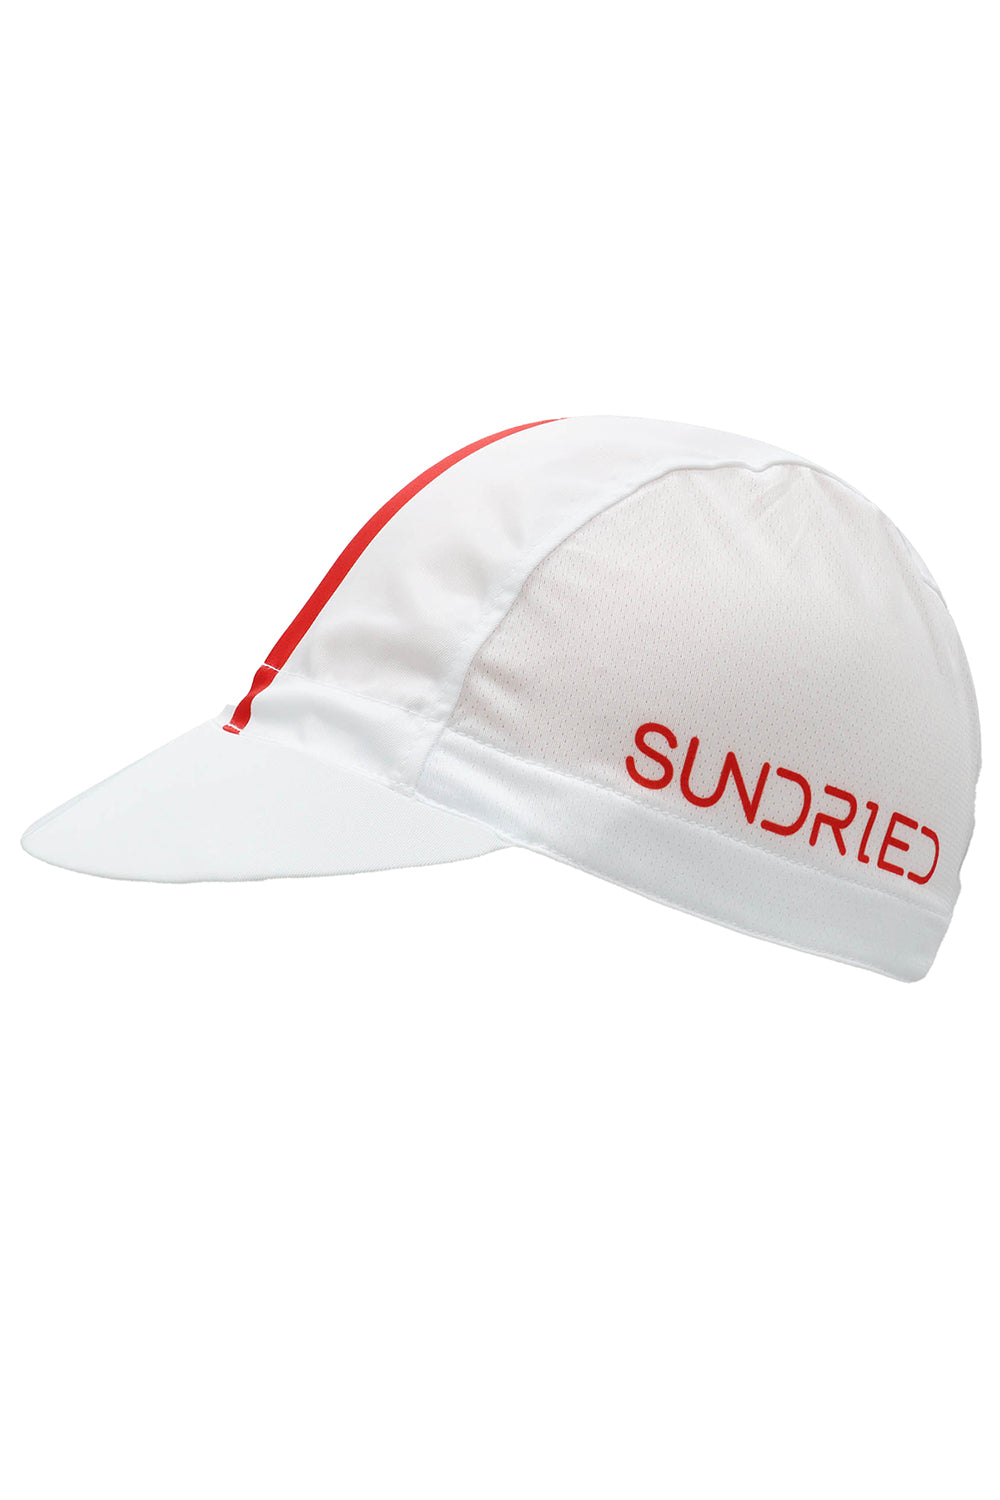 Sundried Stripe Cycle Cap Hats White SD0435 White Activewear